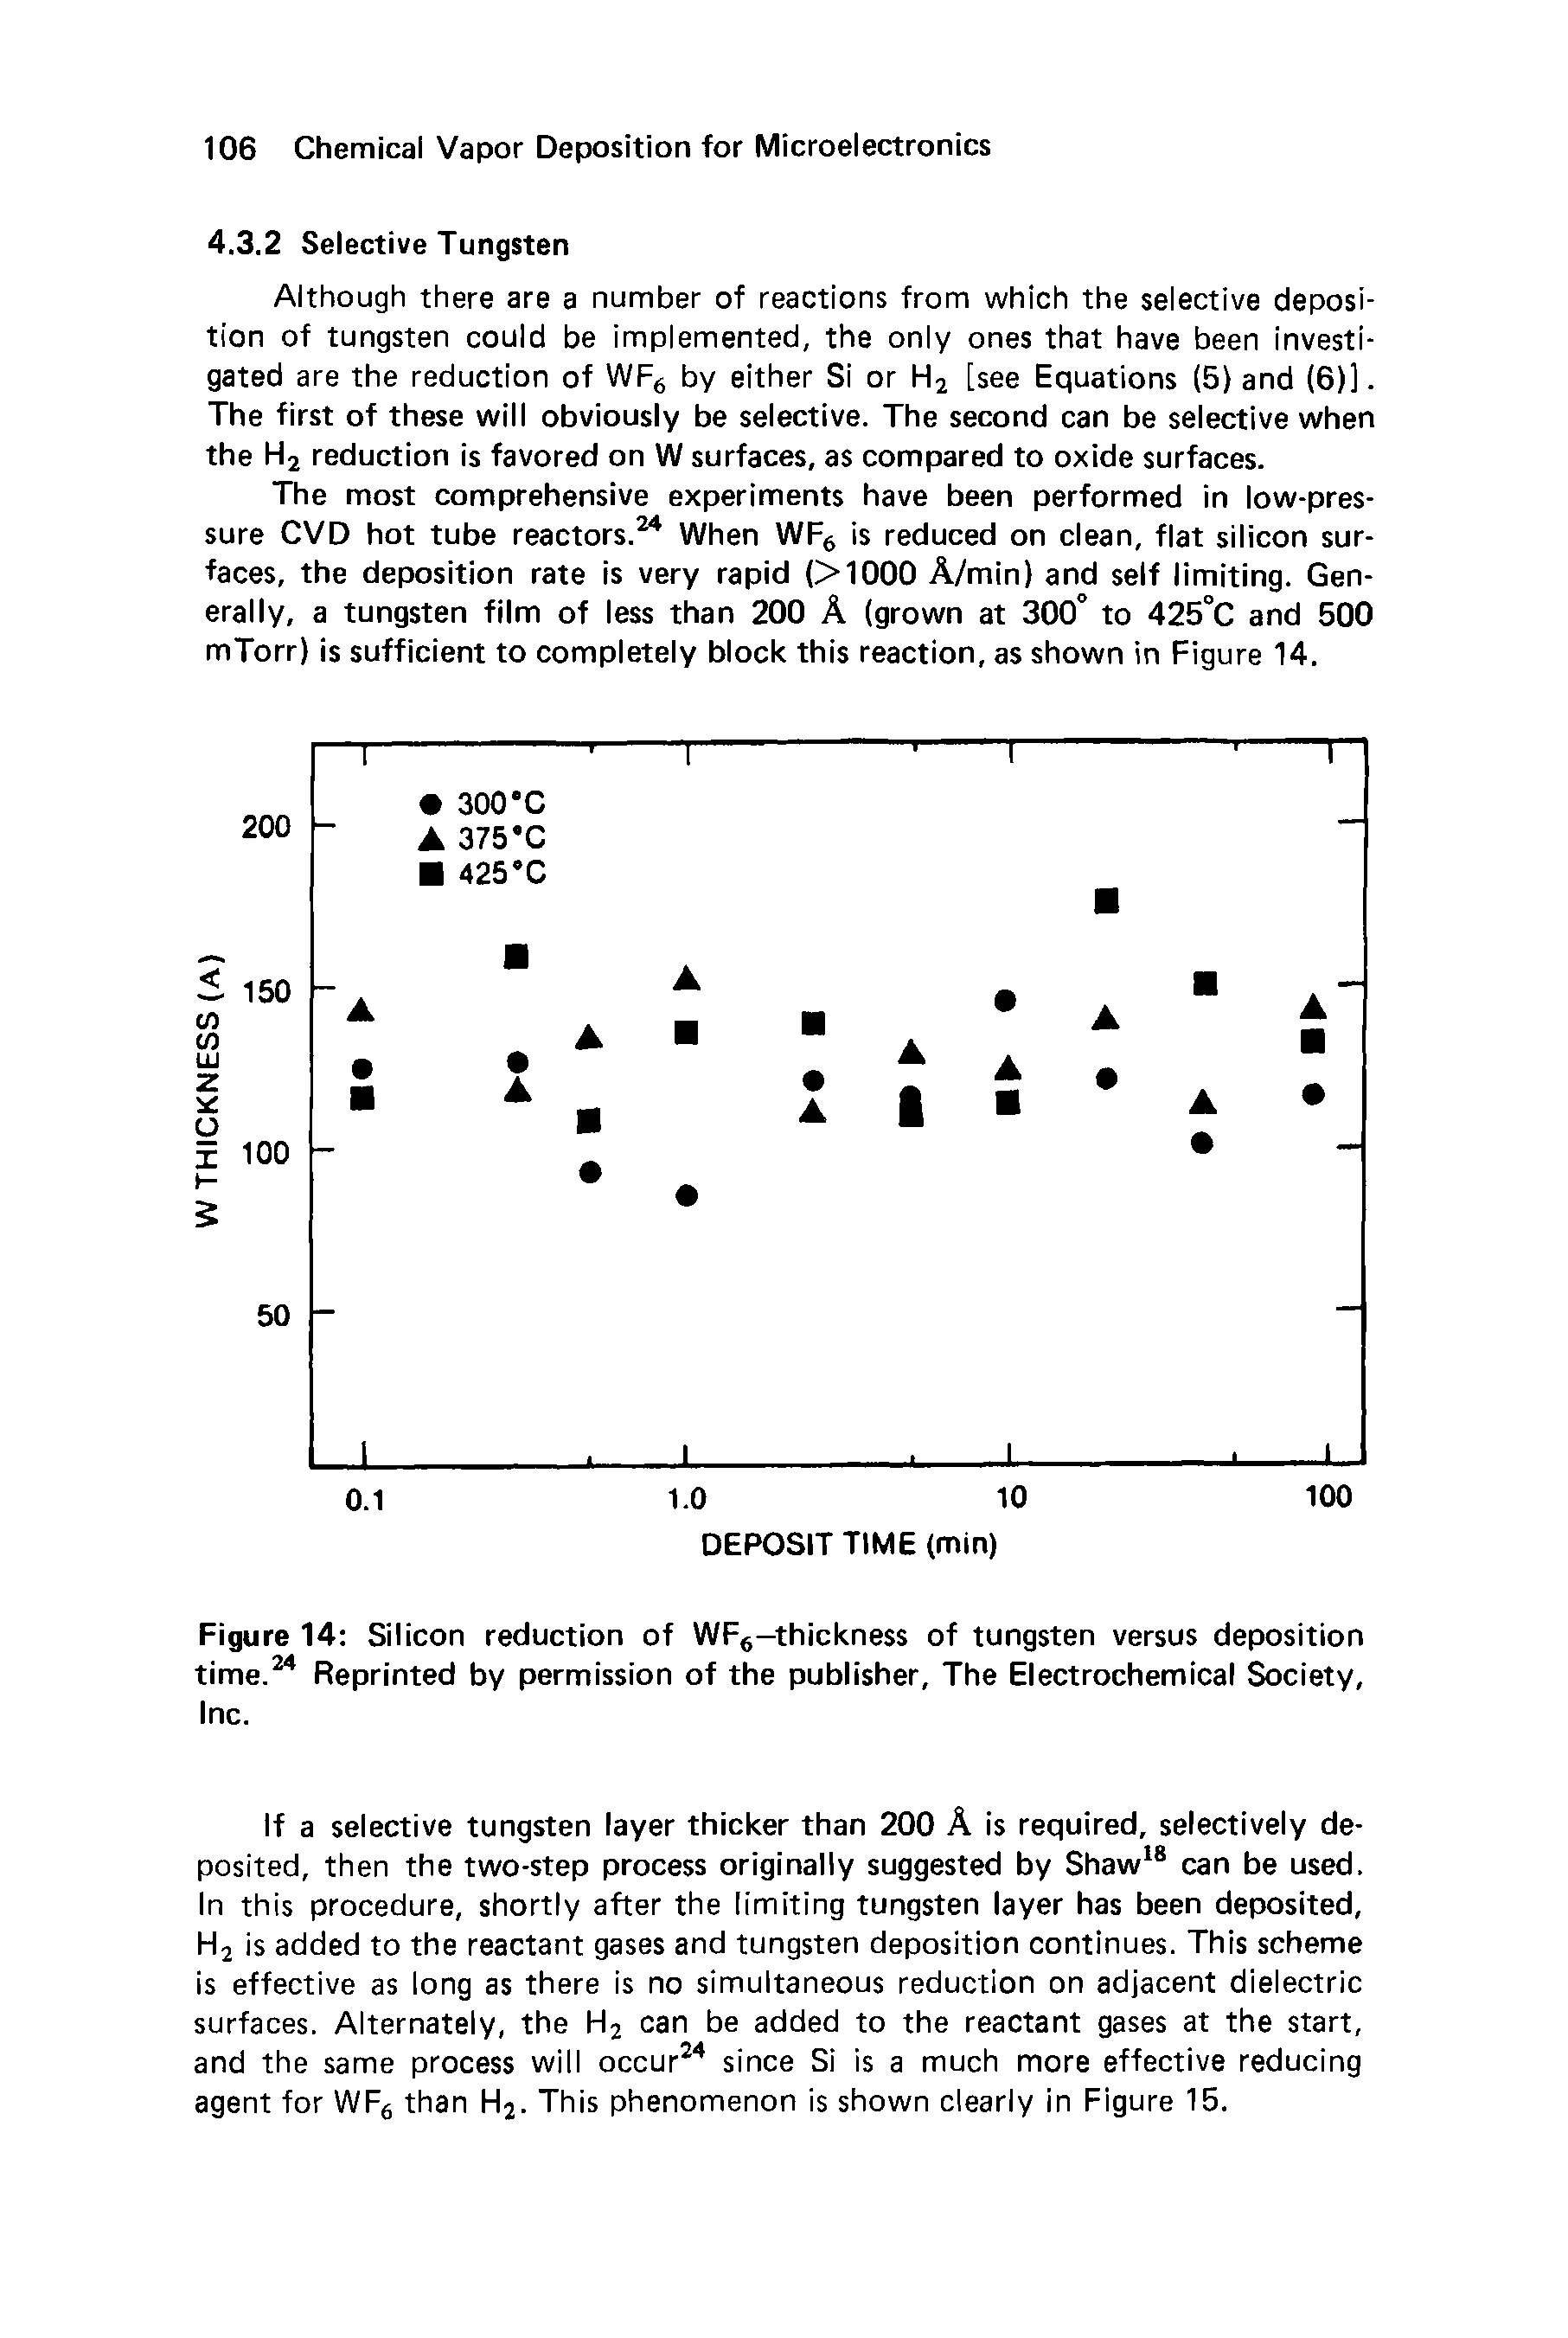 Figure 14 Silicon reduction of WF6-thickness of tungsten versus deposition time.24 Reprinted by permission of the publisher. The Electrochemical Society, Inc.